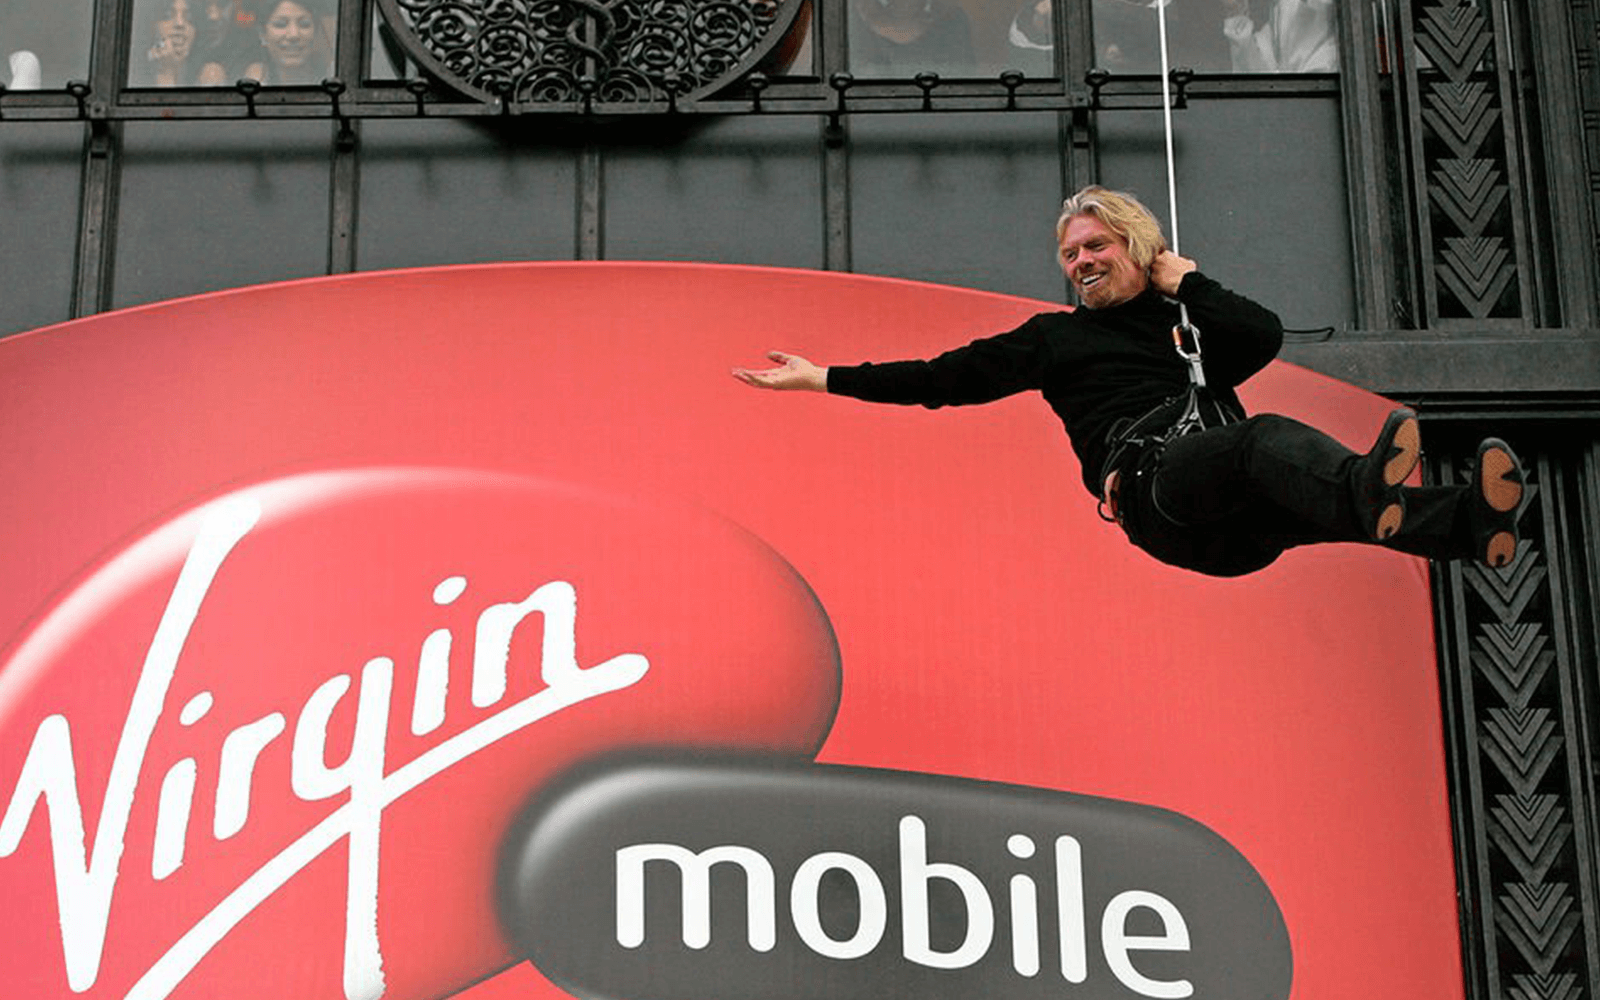 Richard Branson abseiling down a building with a giant Virgin Mobile logo on it